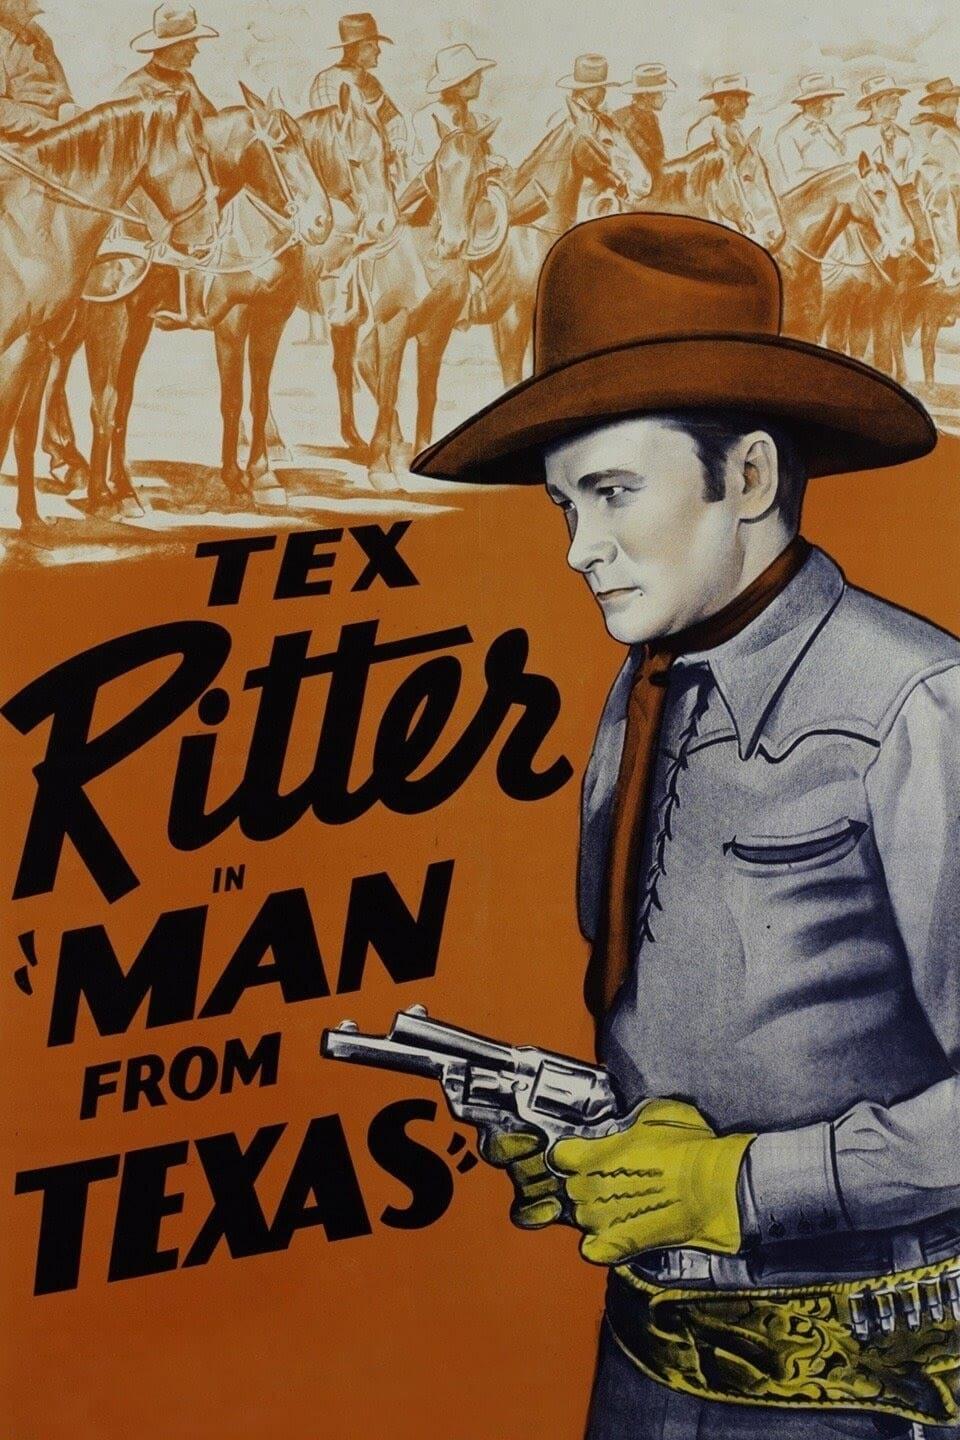 The Man from Texas poster